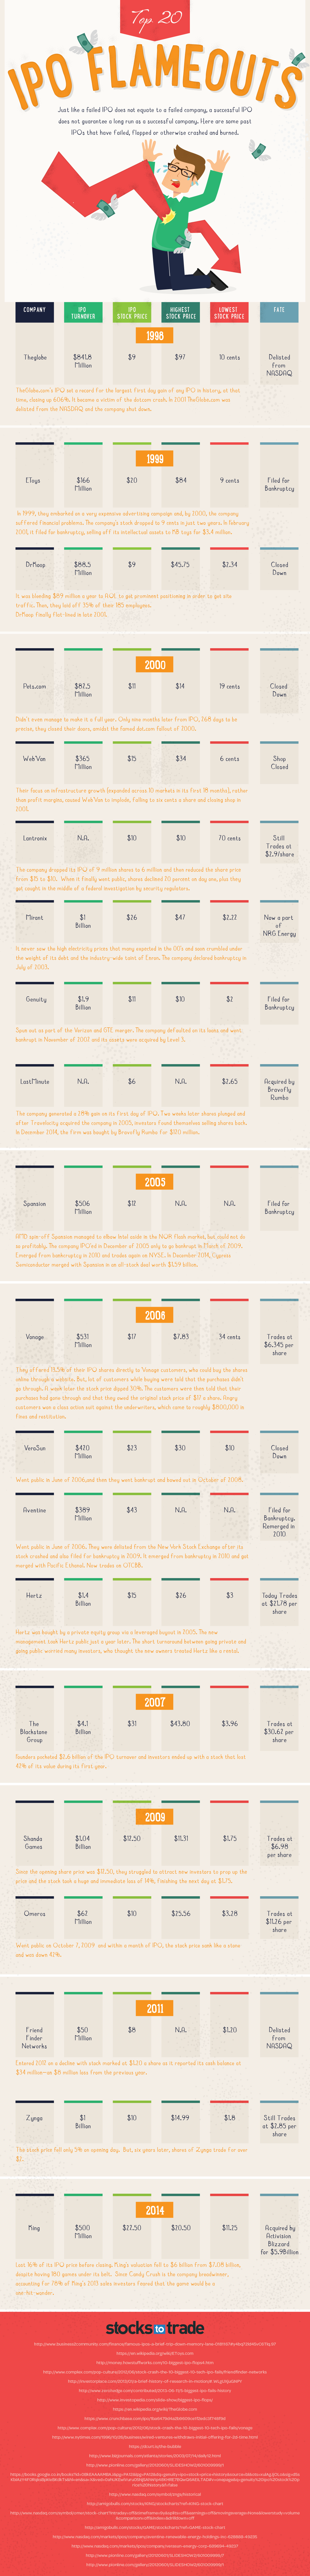 Top 20 IPO Flameouts {INFOGRAPHIC}